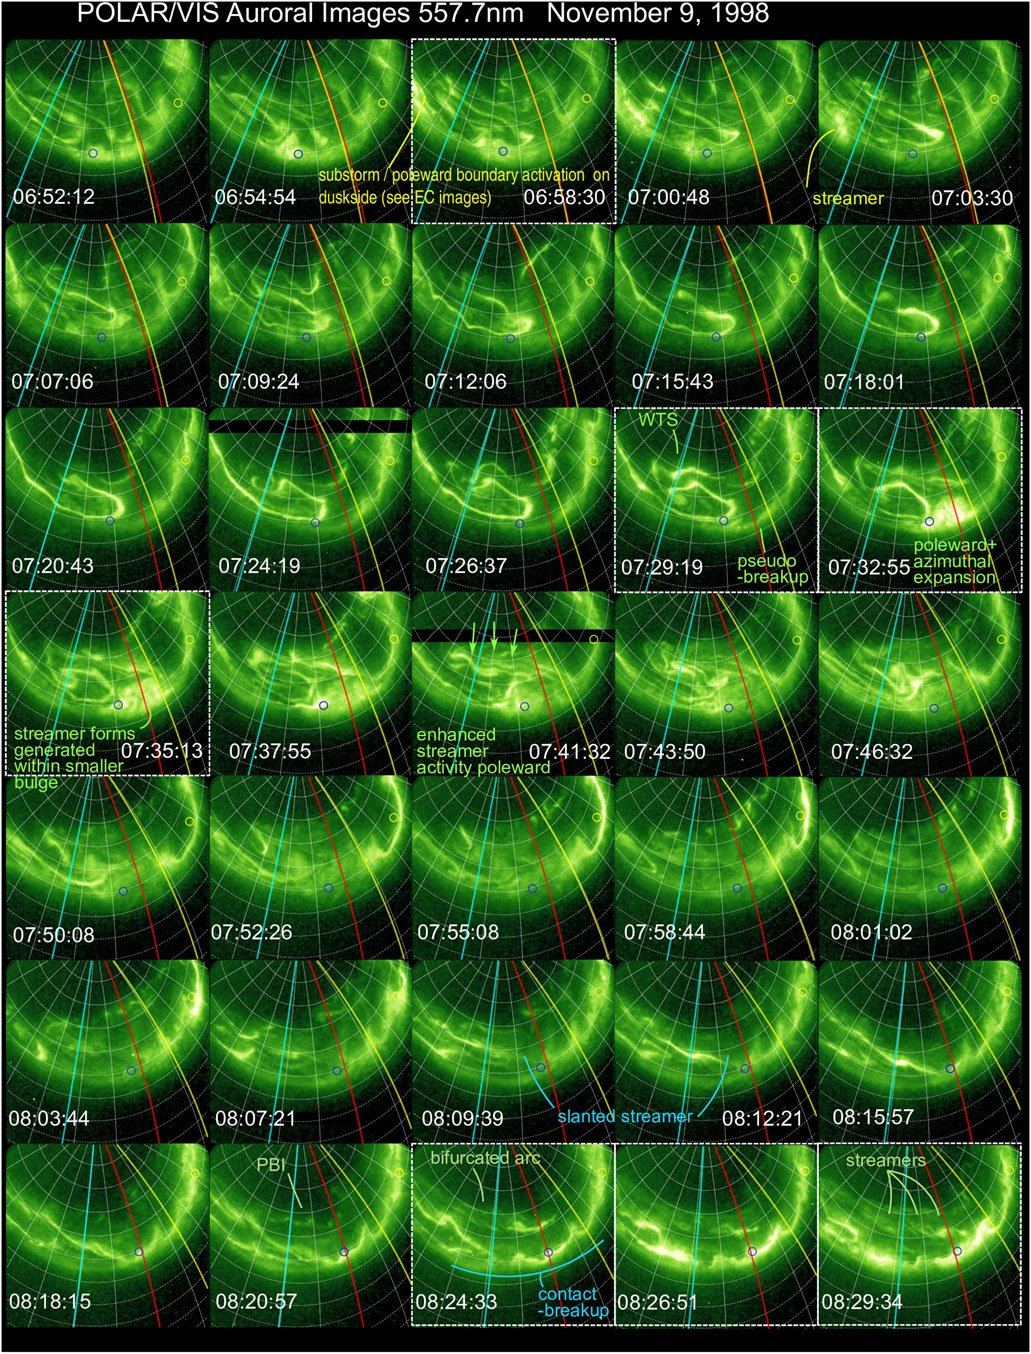 Example of multiple auroral streamers. Development of four auroral